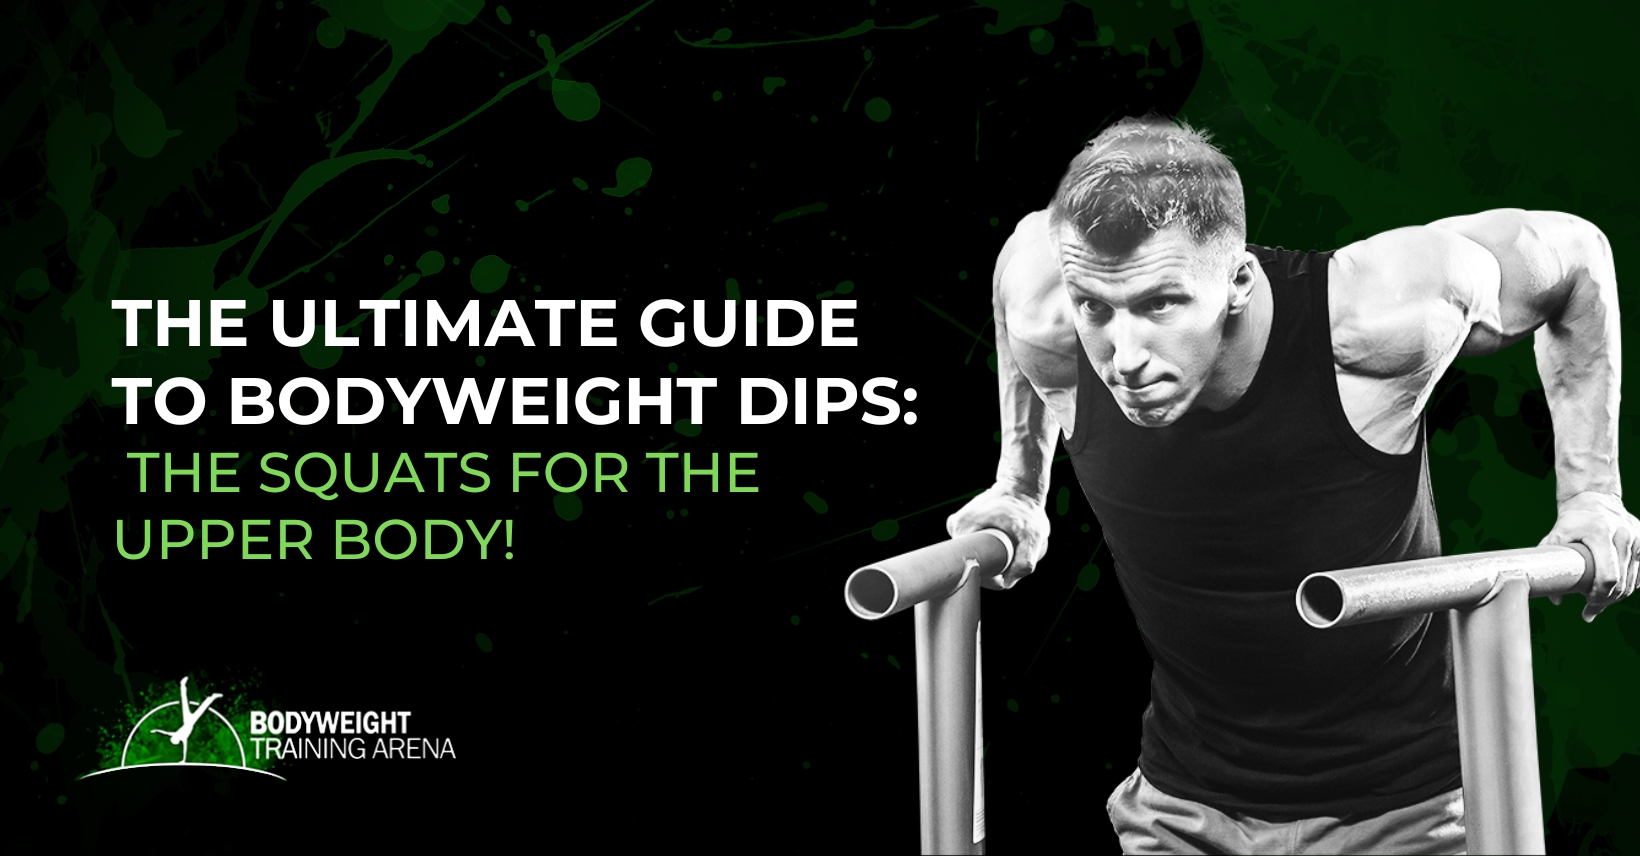 The Ultimate Guide to Bodyweight Dips